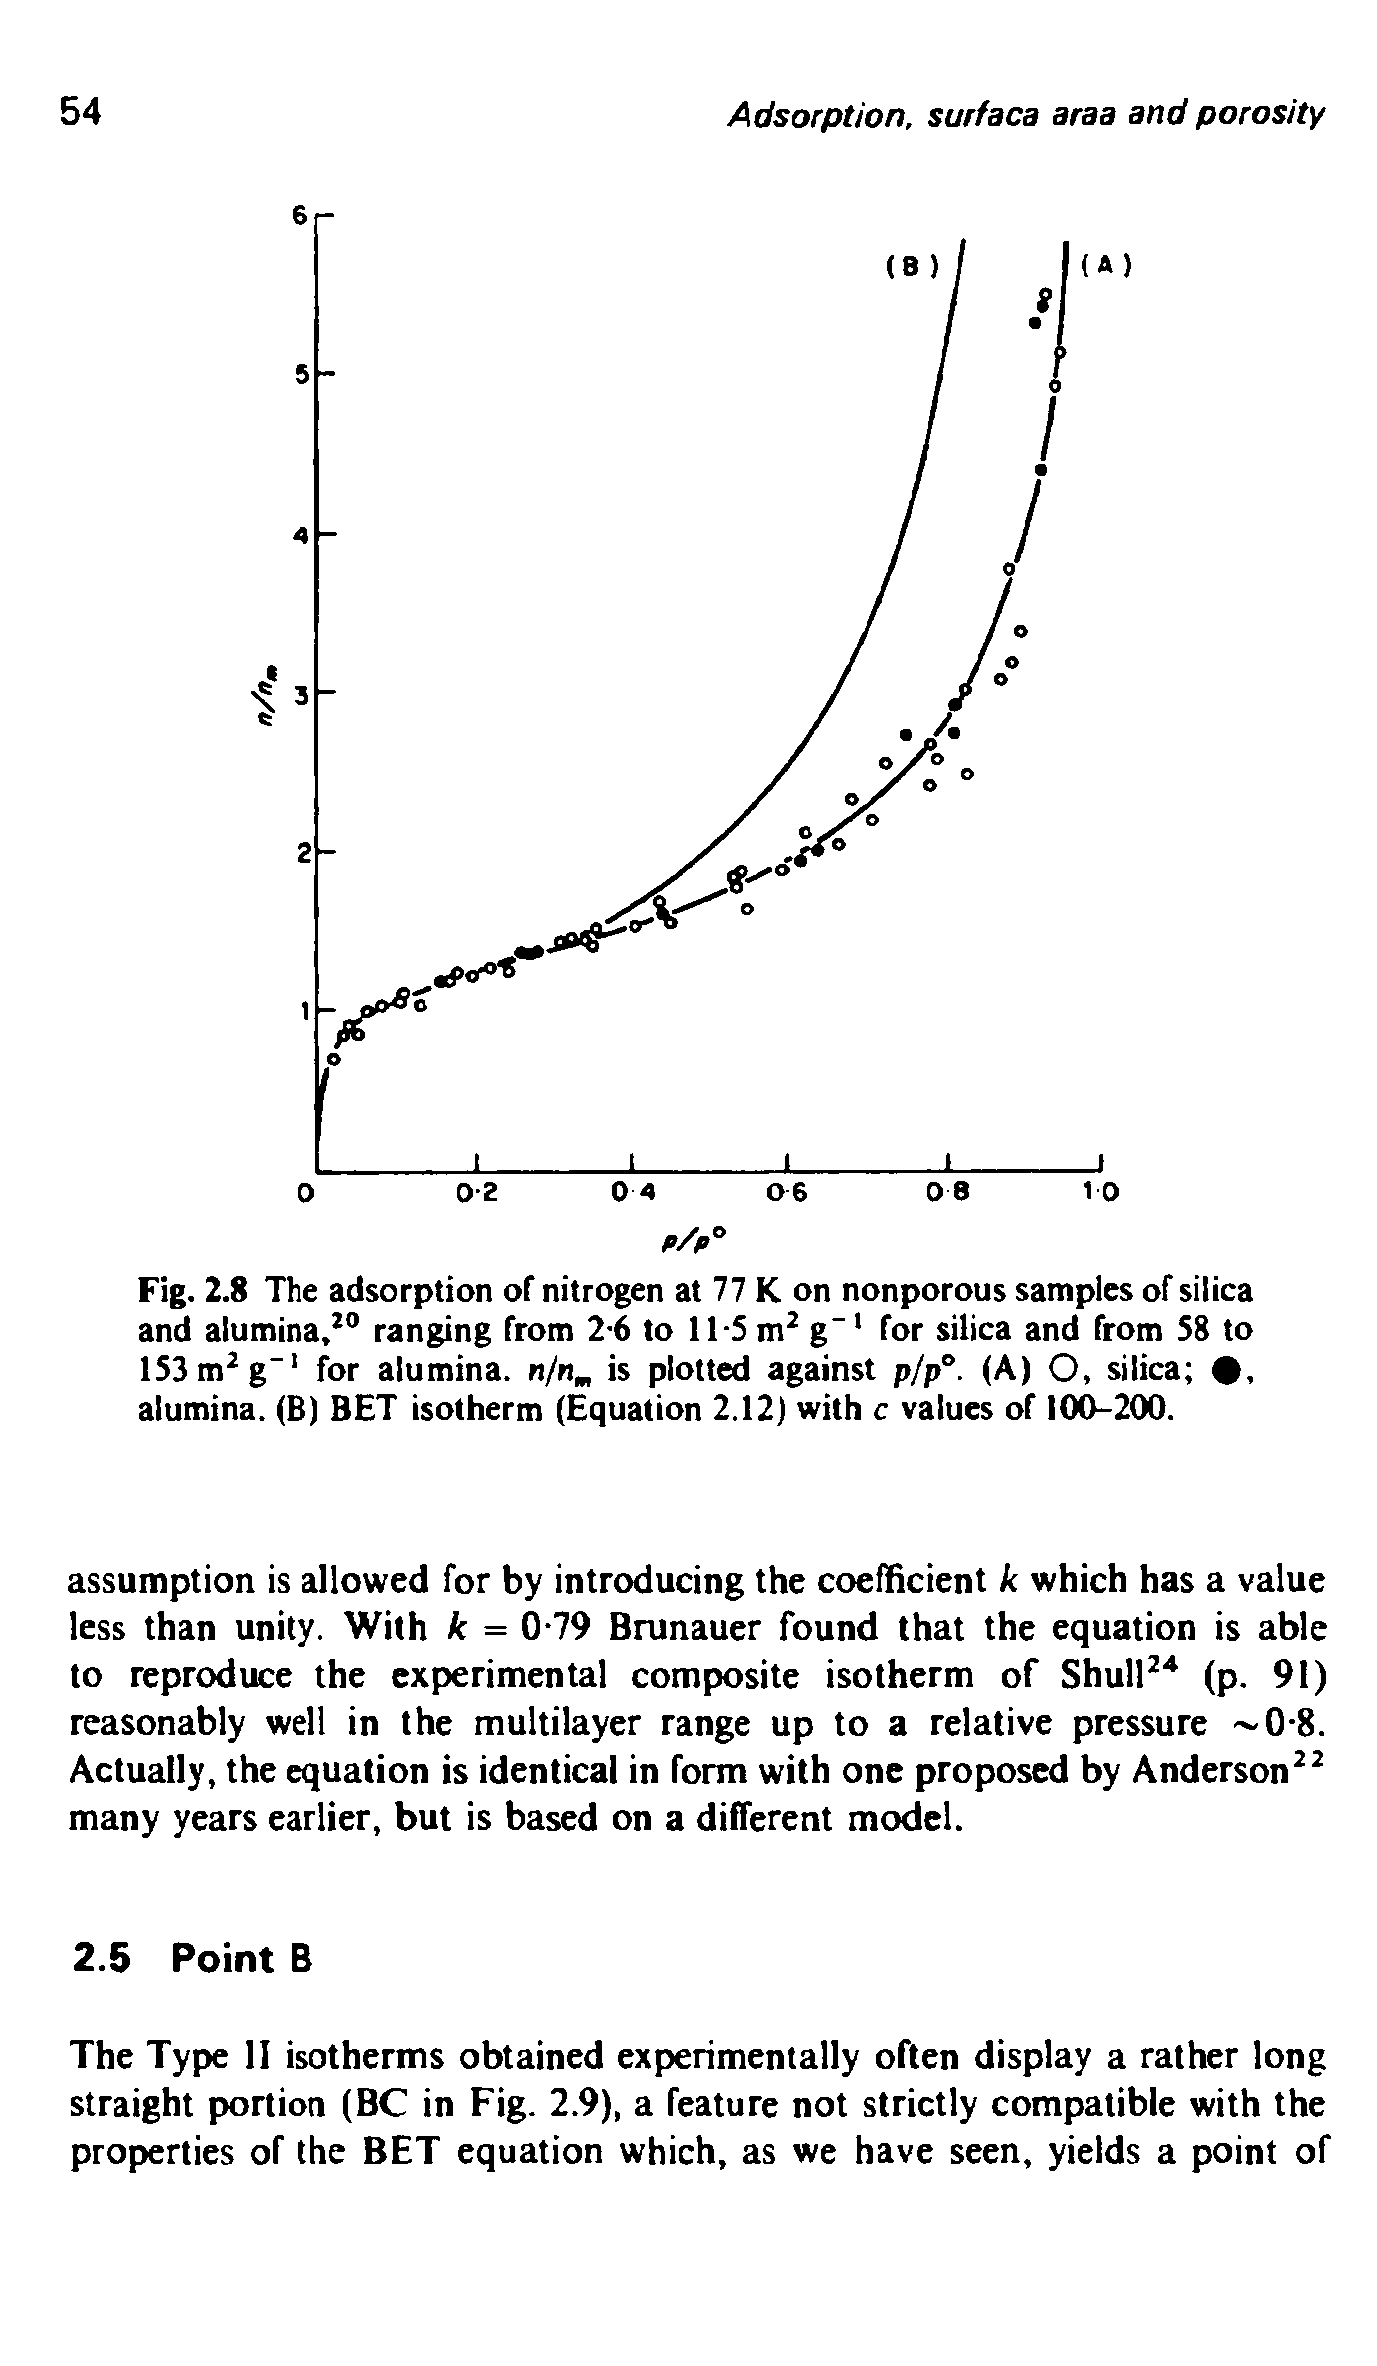 Fig. 2.8 The adsorption of nitrogen at 77 K on nonporous samples of silica and alumina, ranging from 2-6 to 11-5 m g for silica and from 58 to 153m g for alumina. n/n is plotted against pjp°. (A) O, silica , alumina. (B) BET isotherm (Equation 2.12) with c values of 100-2(X).